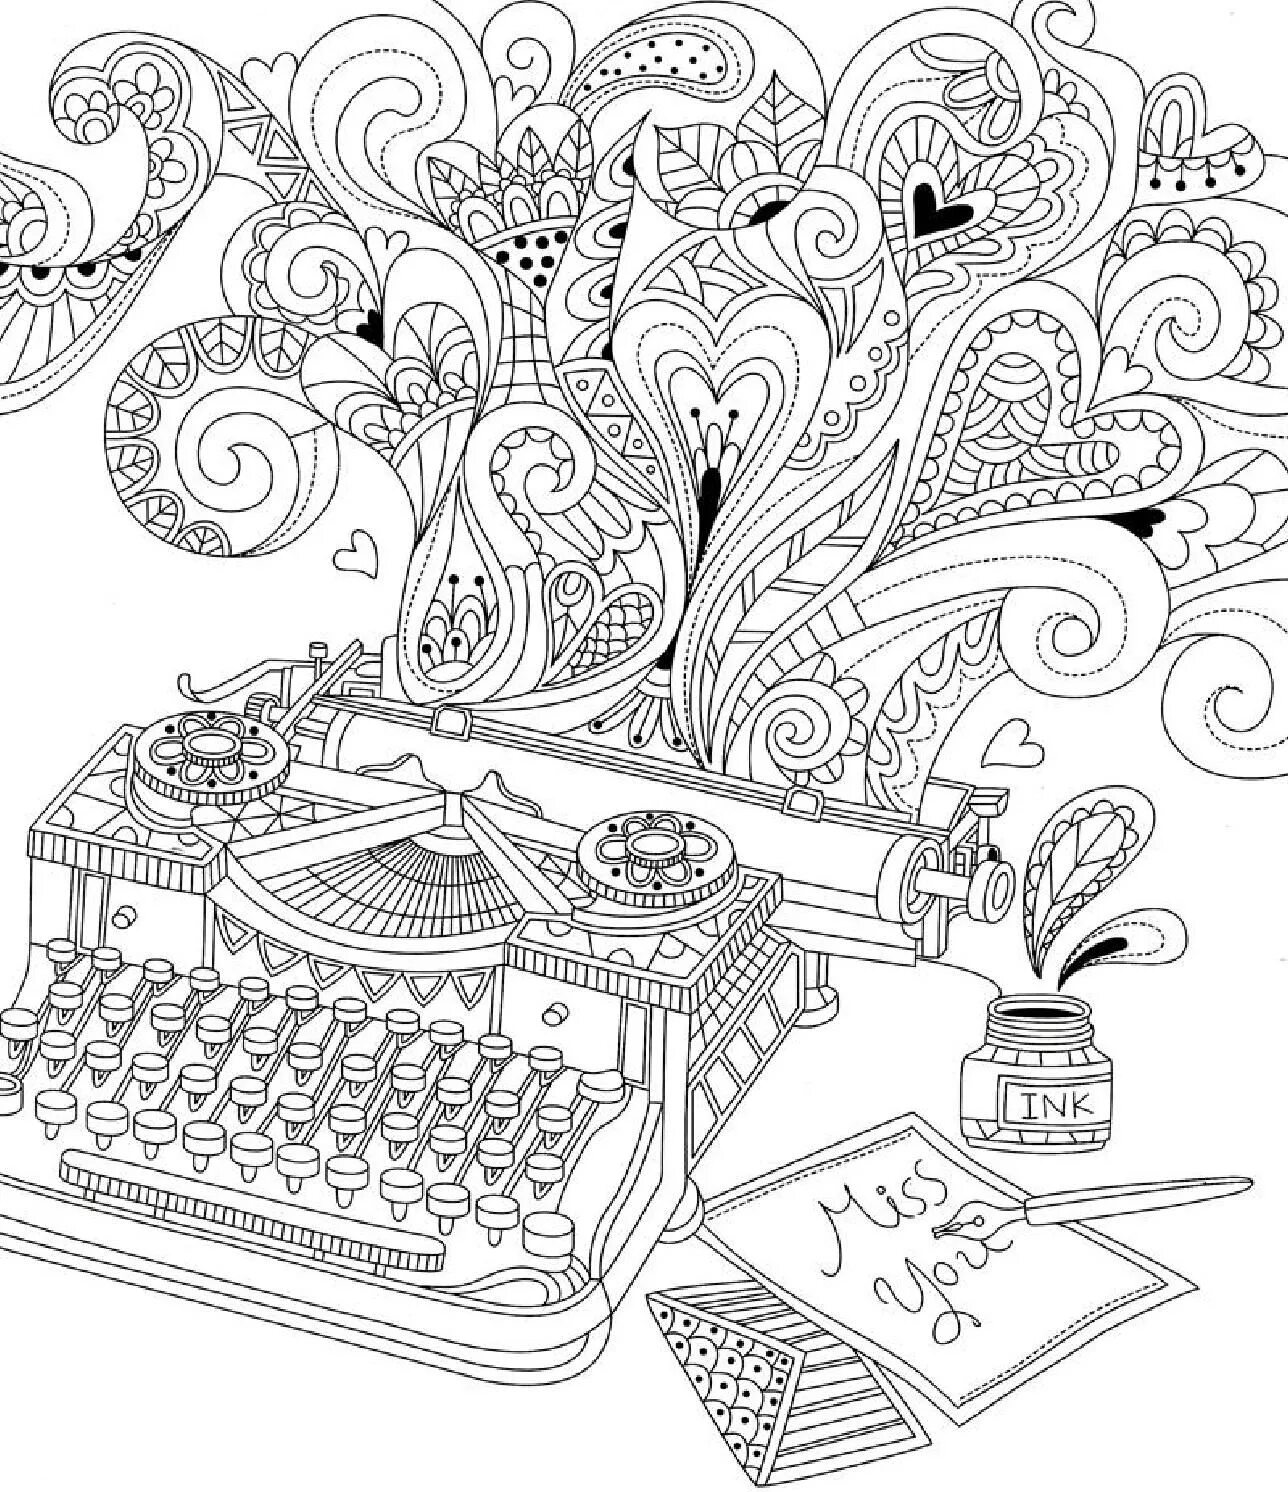 Artful coloring book for adults